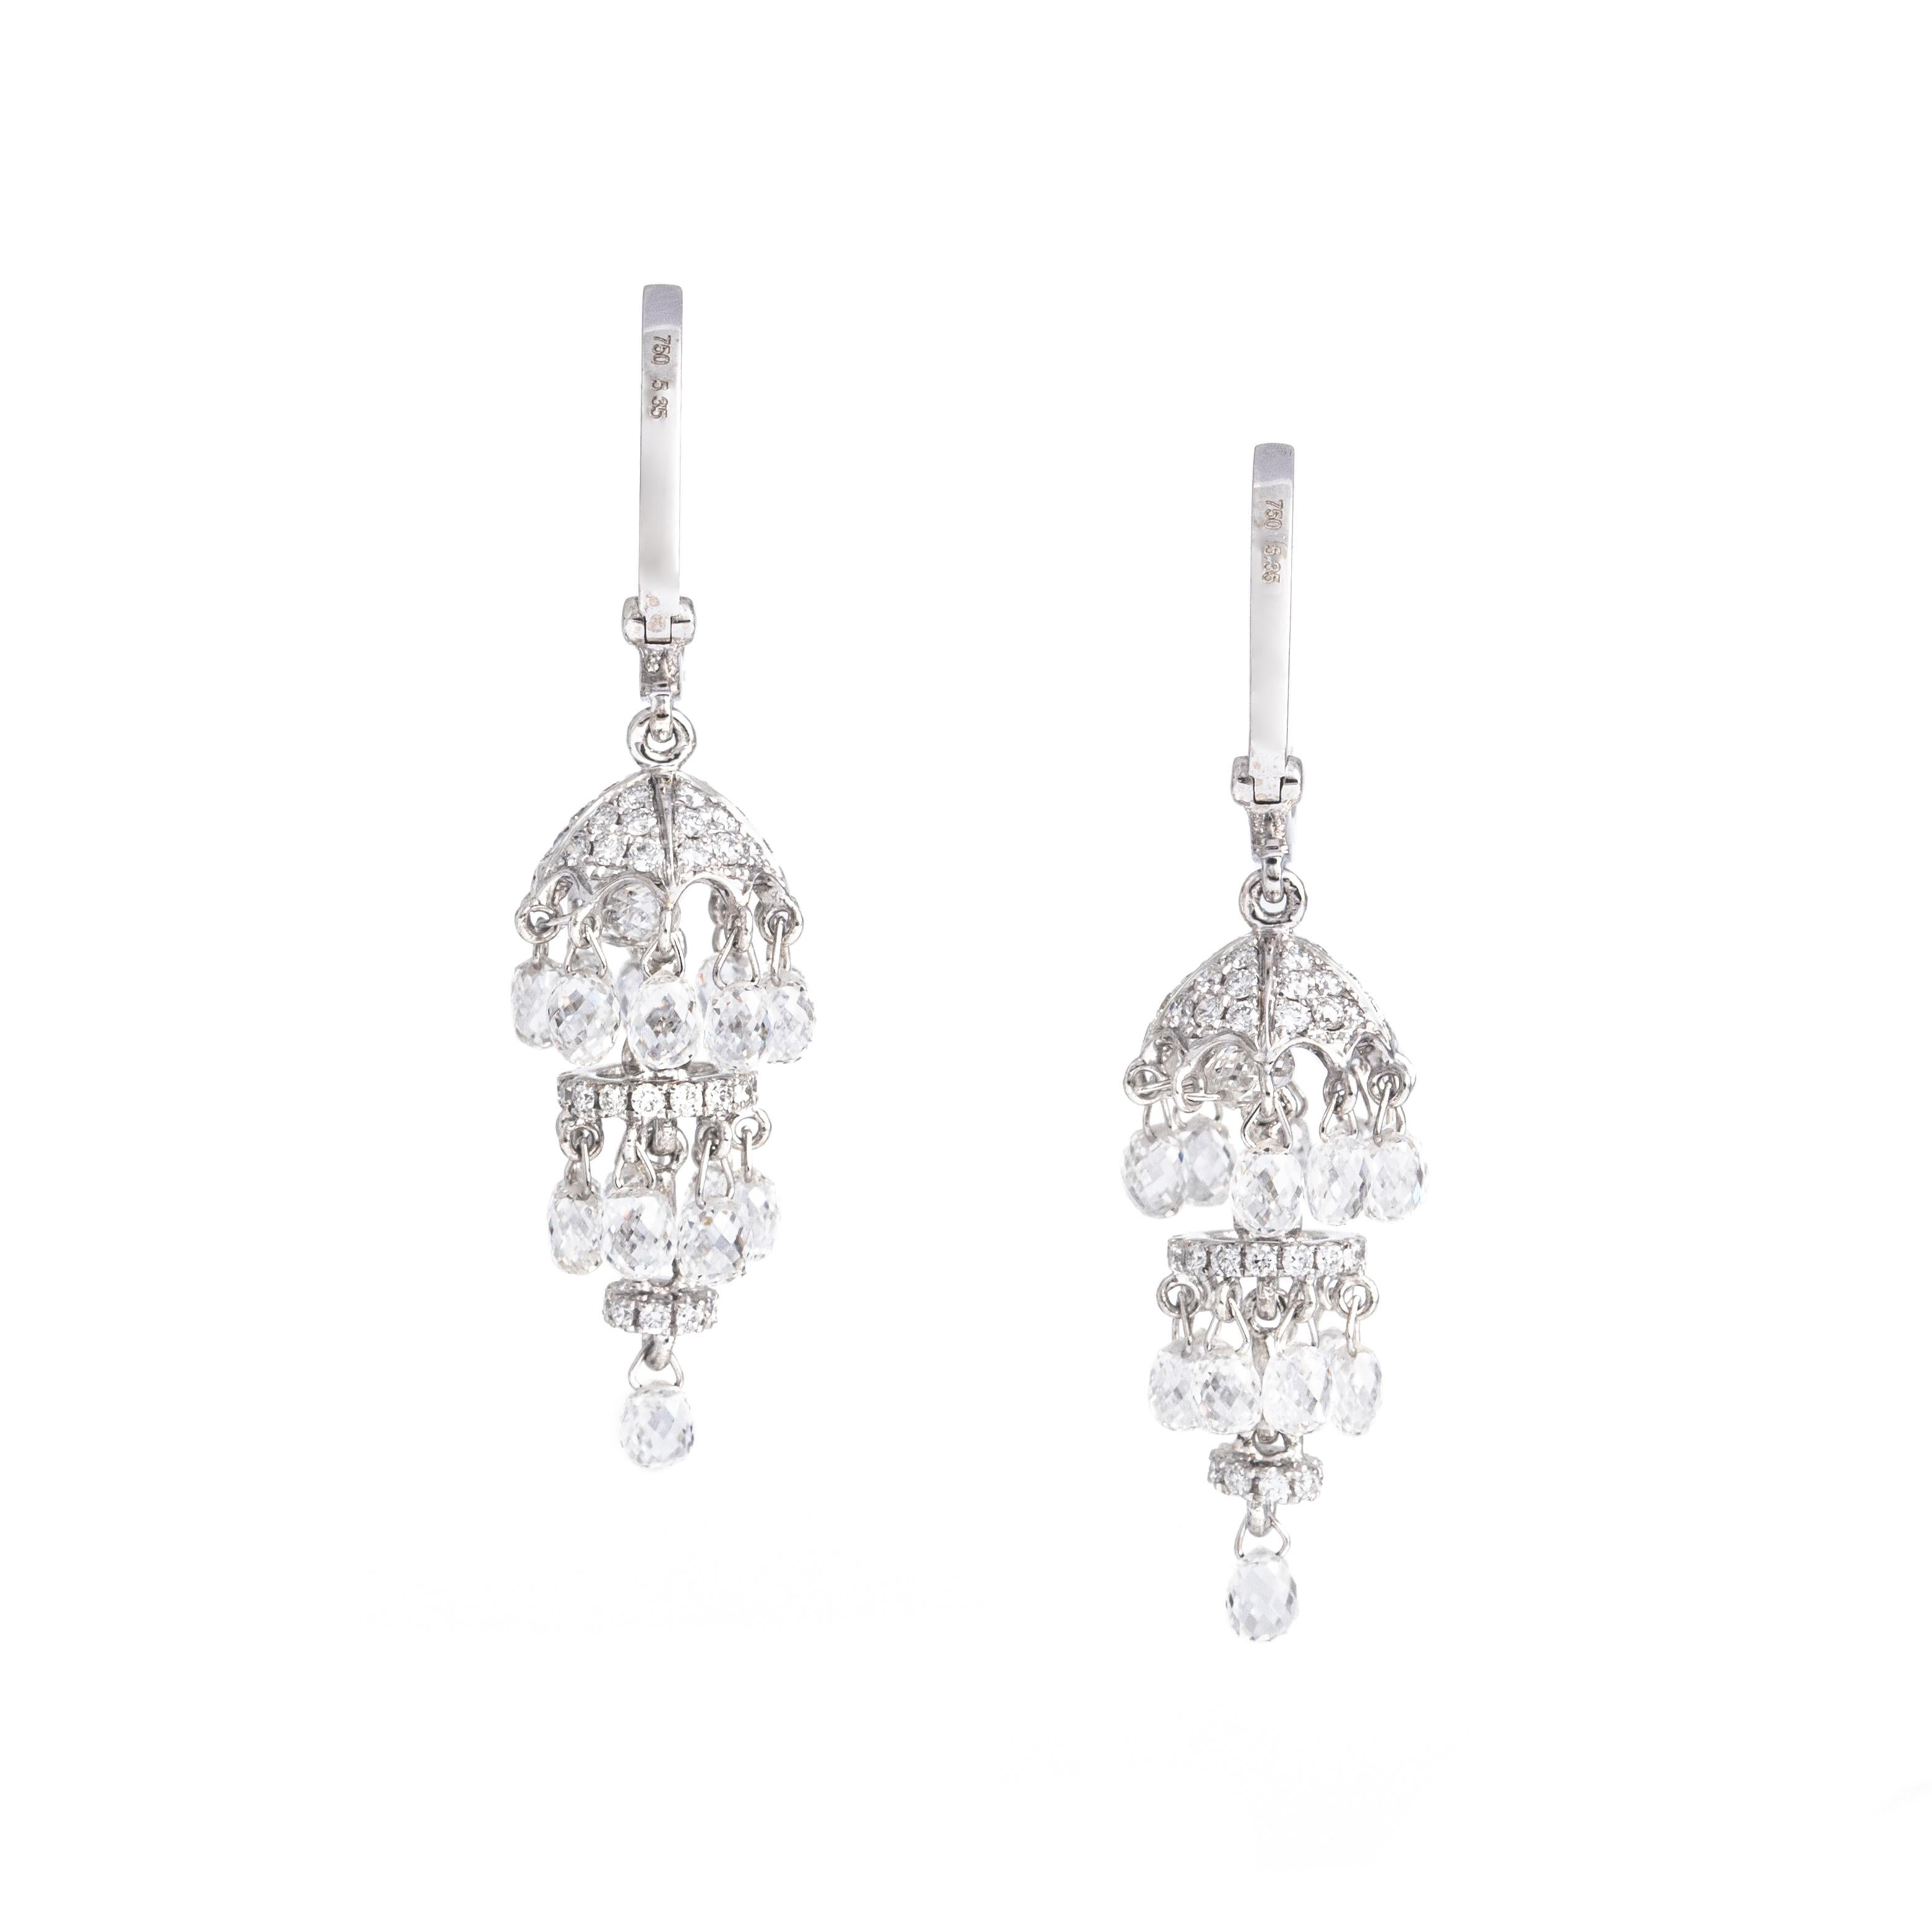 Earrings in white gold 18K briolette cut and round diamond 5.35 carat, estimated G/H color and Si1 clarity. 
Total gross weight: 5.21 grams.
Total length: 3.50 centimeters
Width: approx. 0.30 centimeters up to 1.00 centimeters
